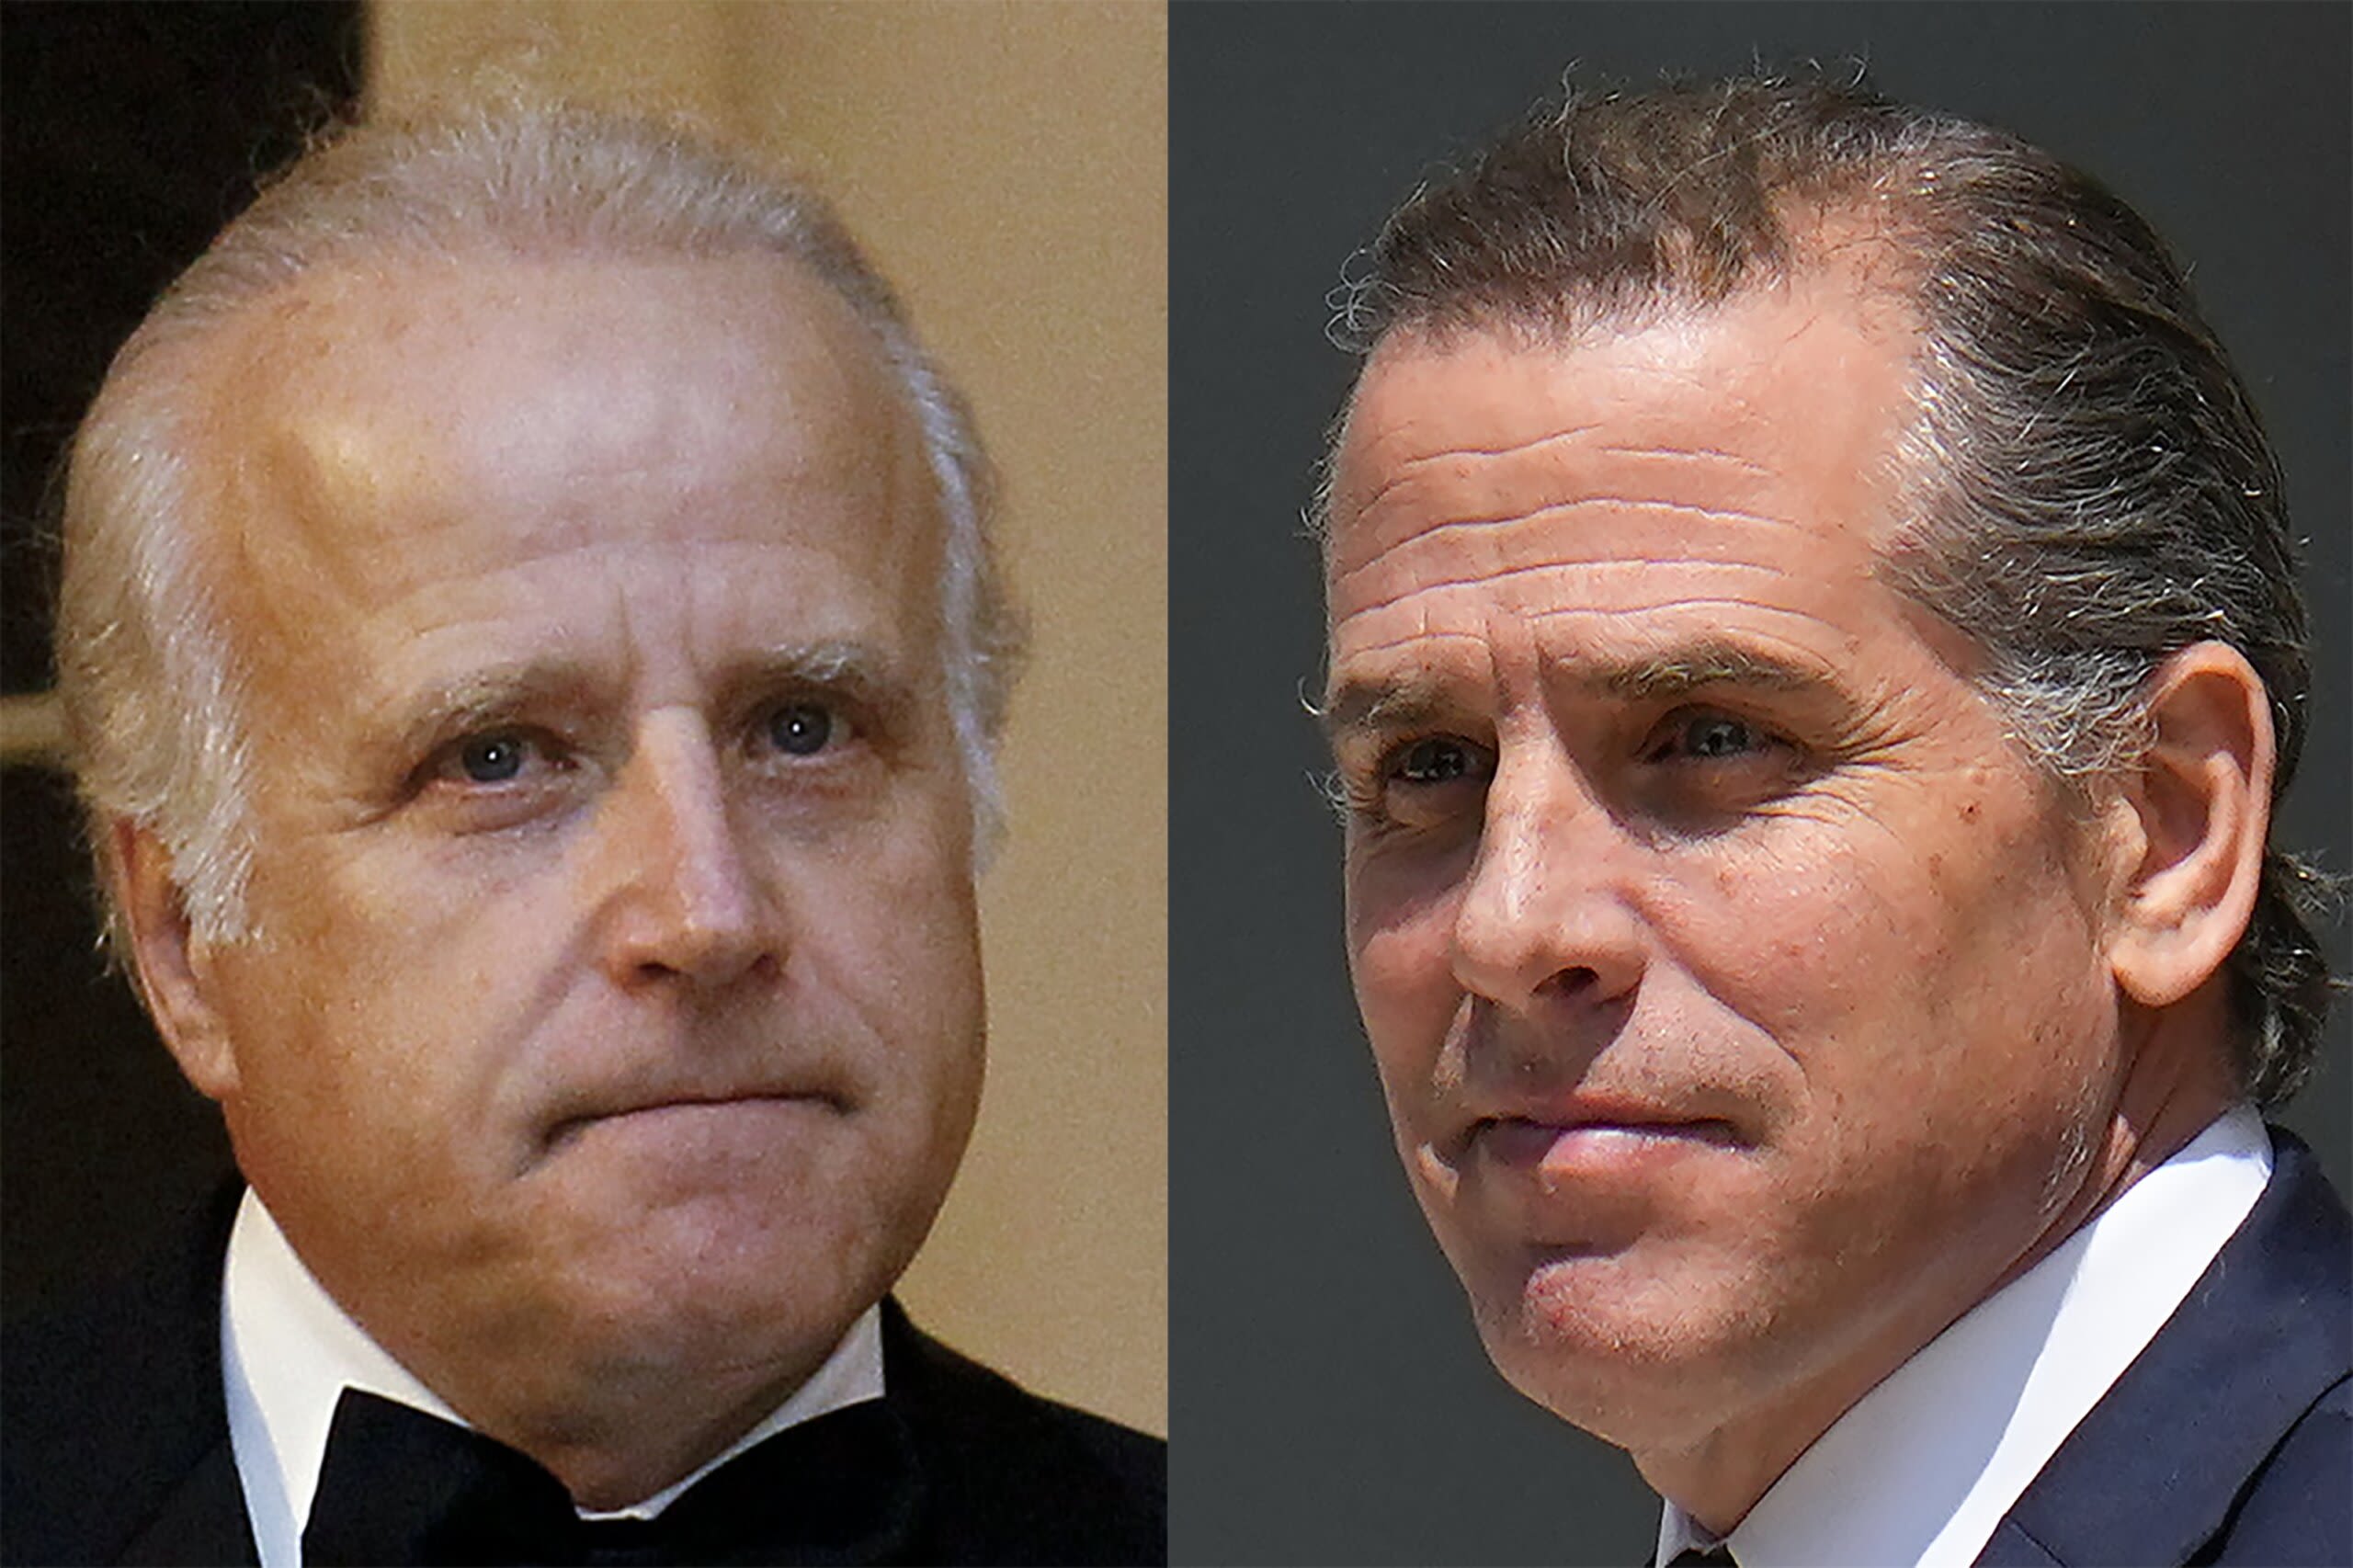 House Republicans issue criminal referrals against James and Hunter Biden, alleging false testimony - WTOP News